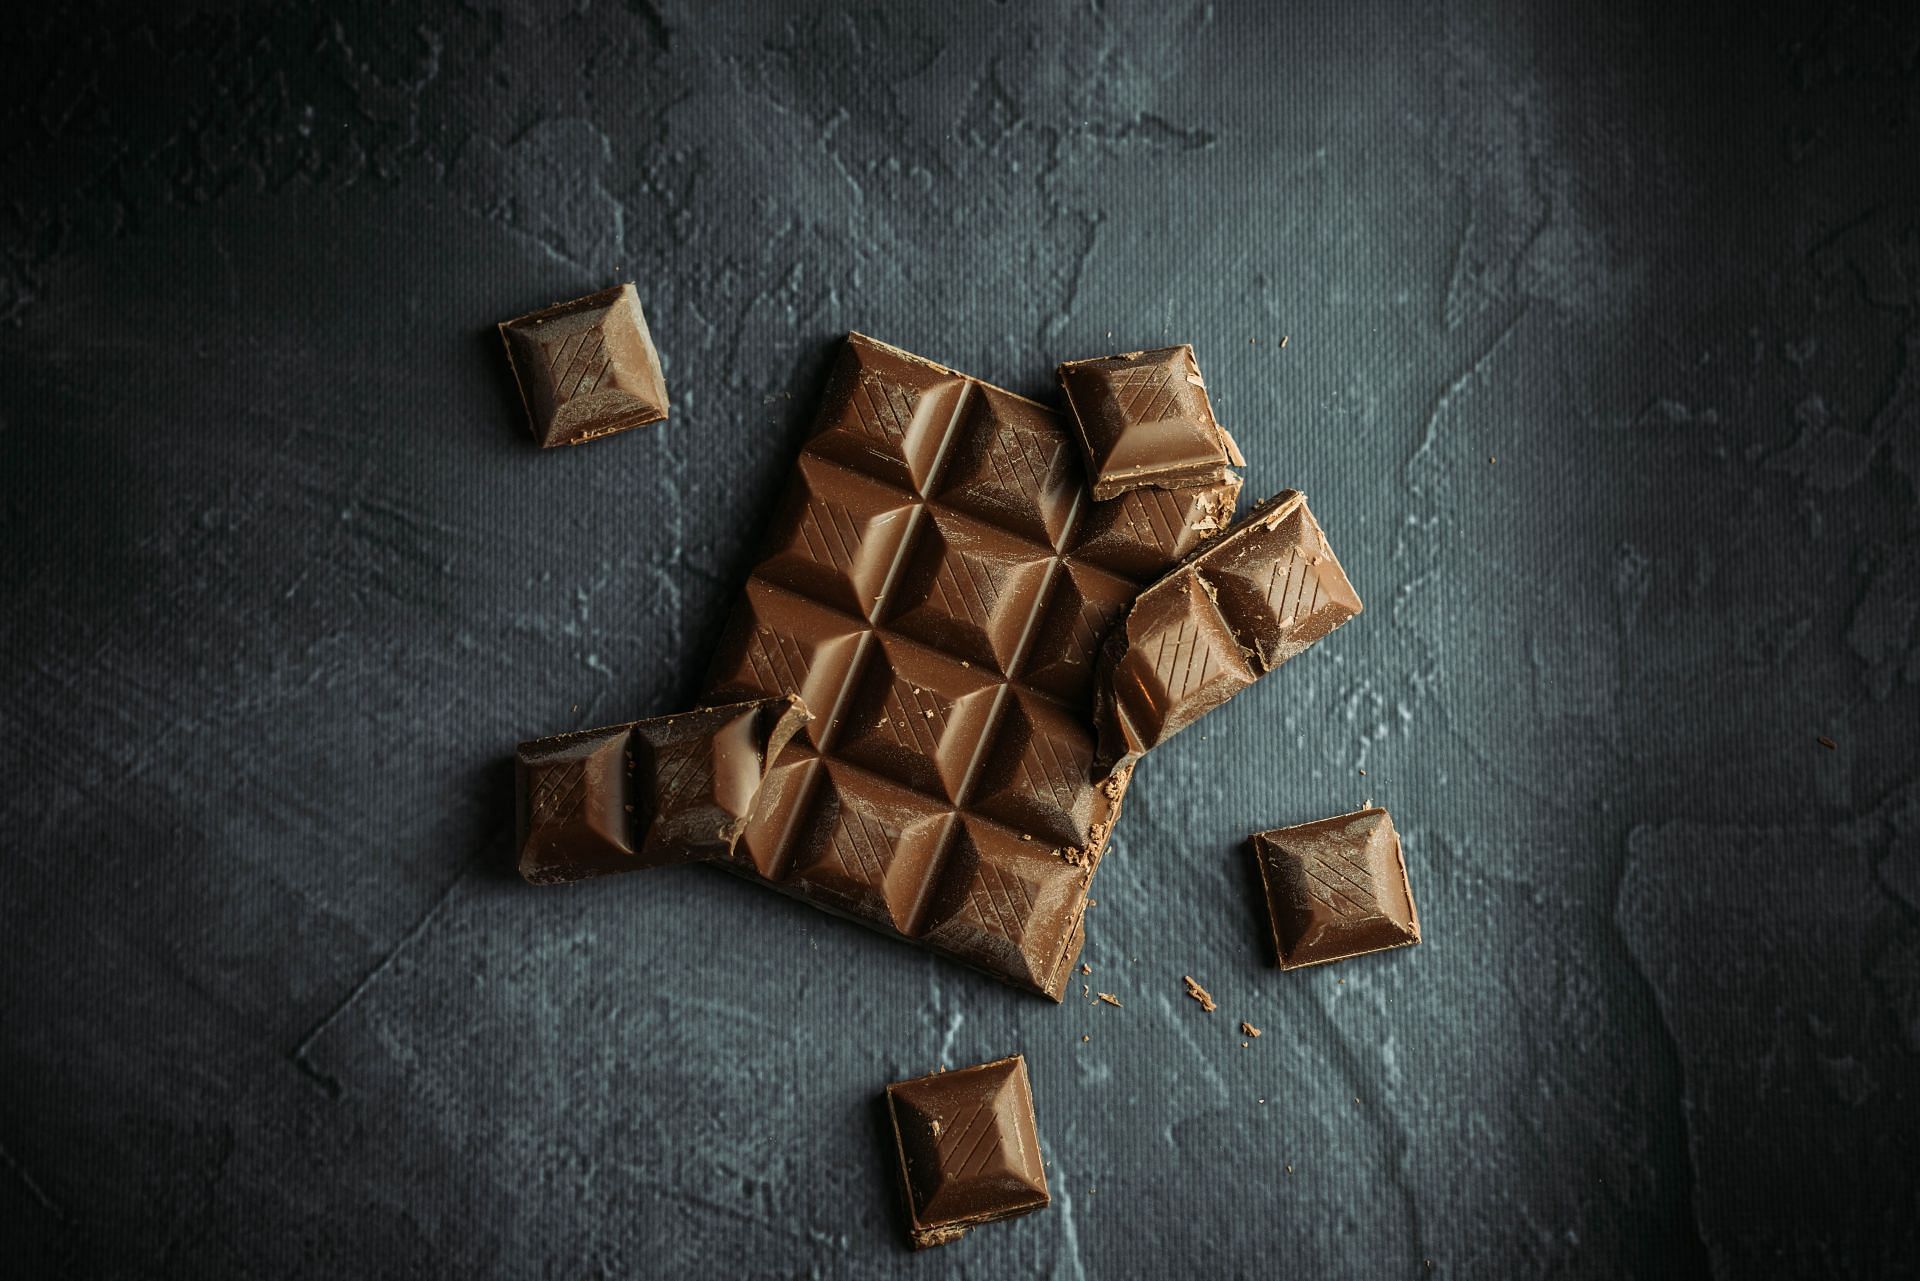 Chocolate can be beneficial to your health (Image via Unsplash/Tamas Pap)